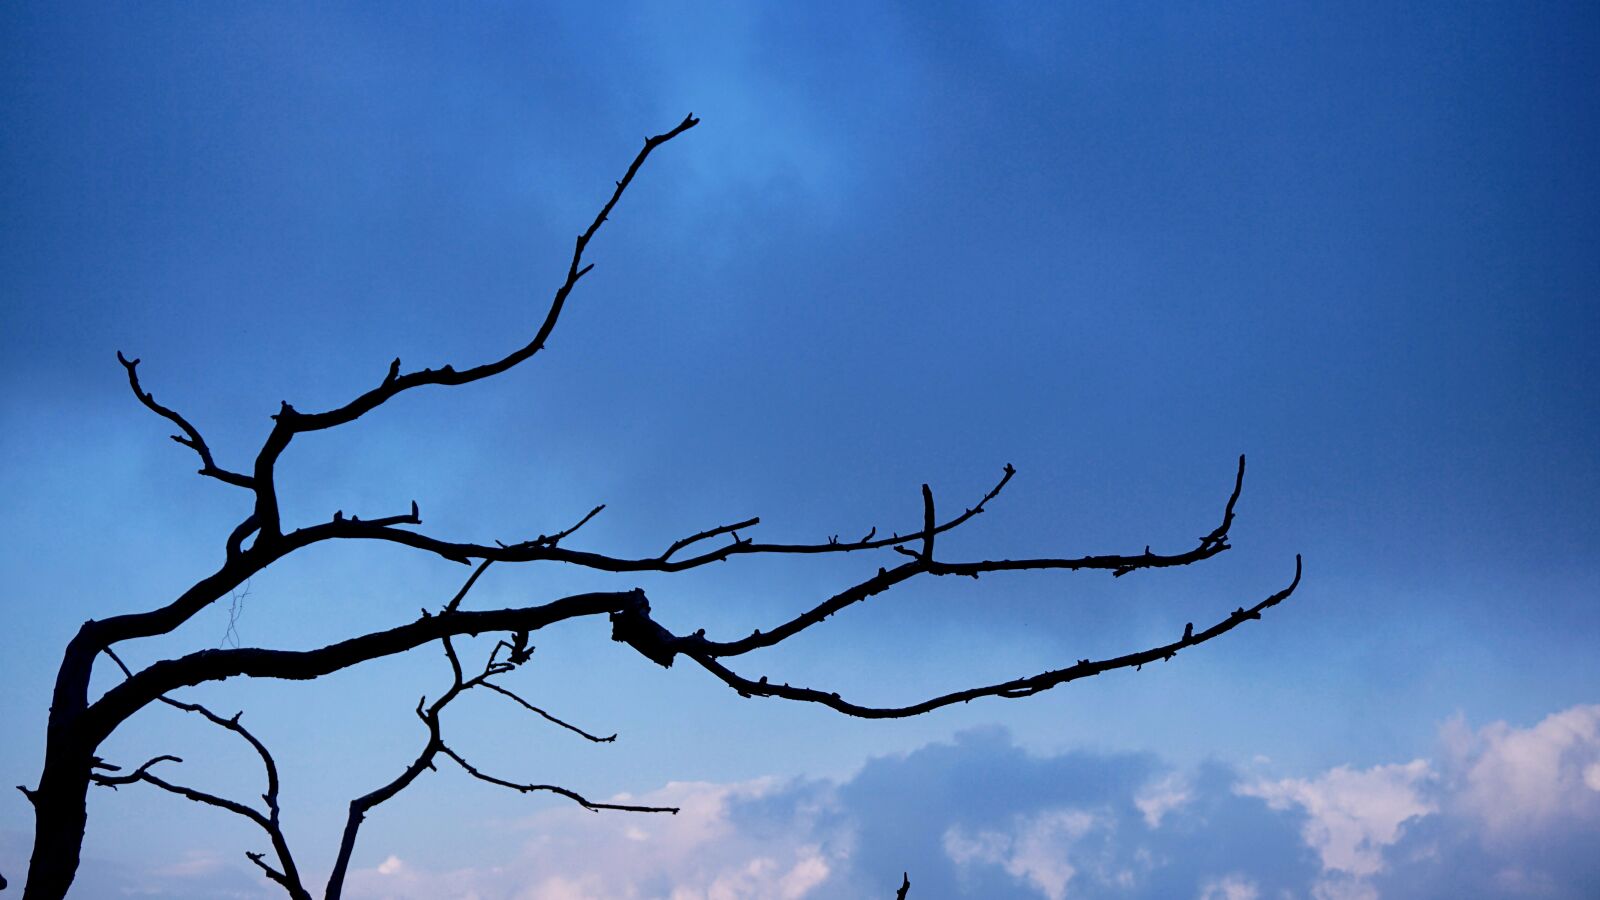 Sony a6000 sample photo. Air, blue, sky, branches photography